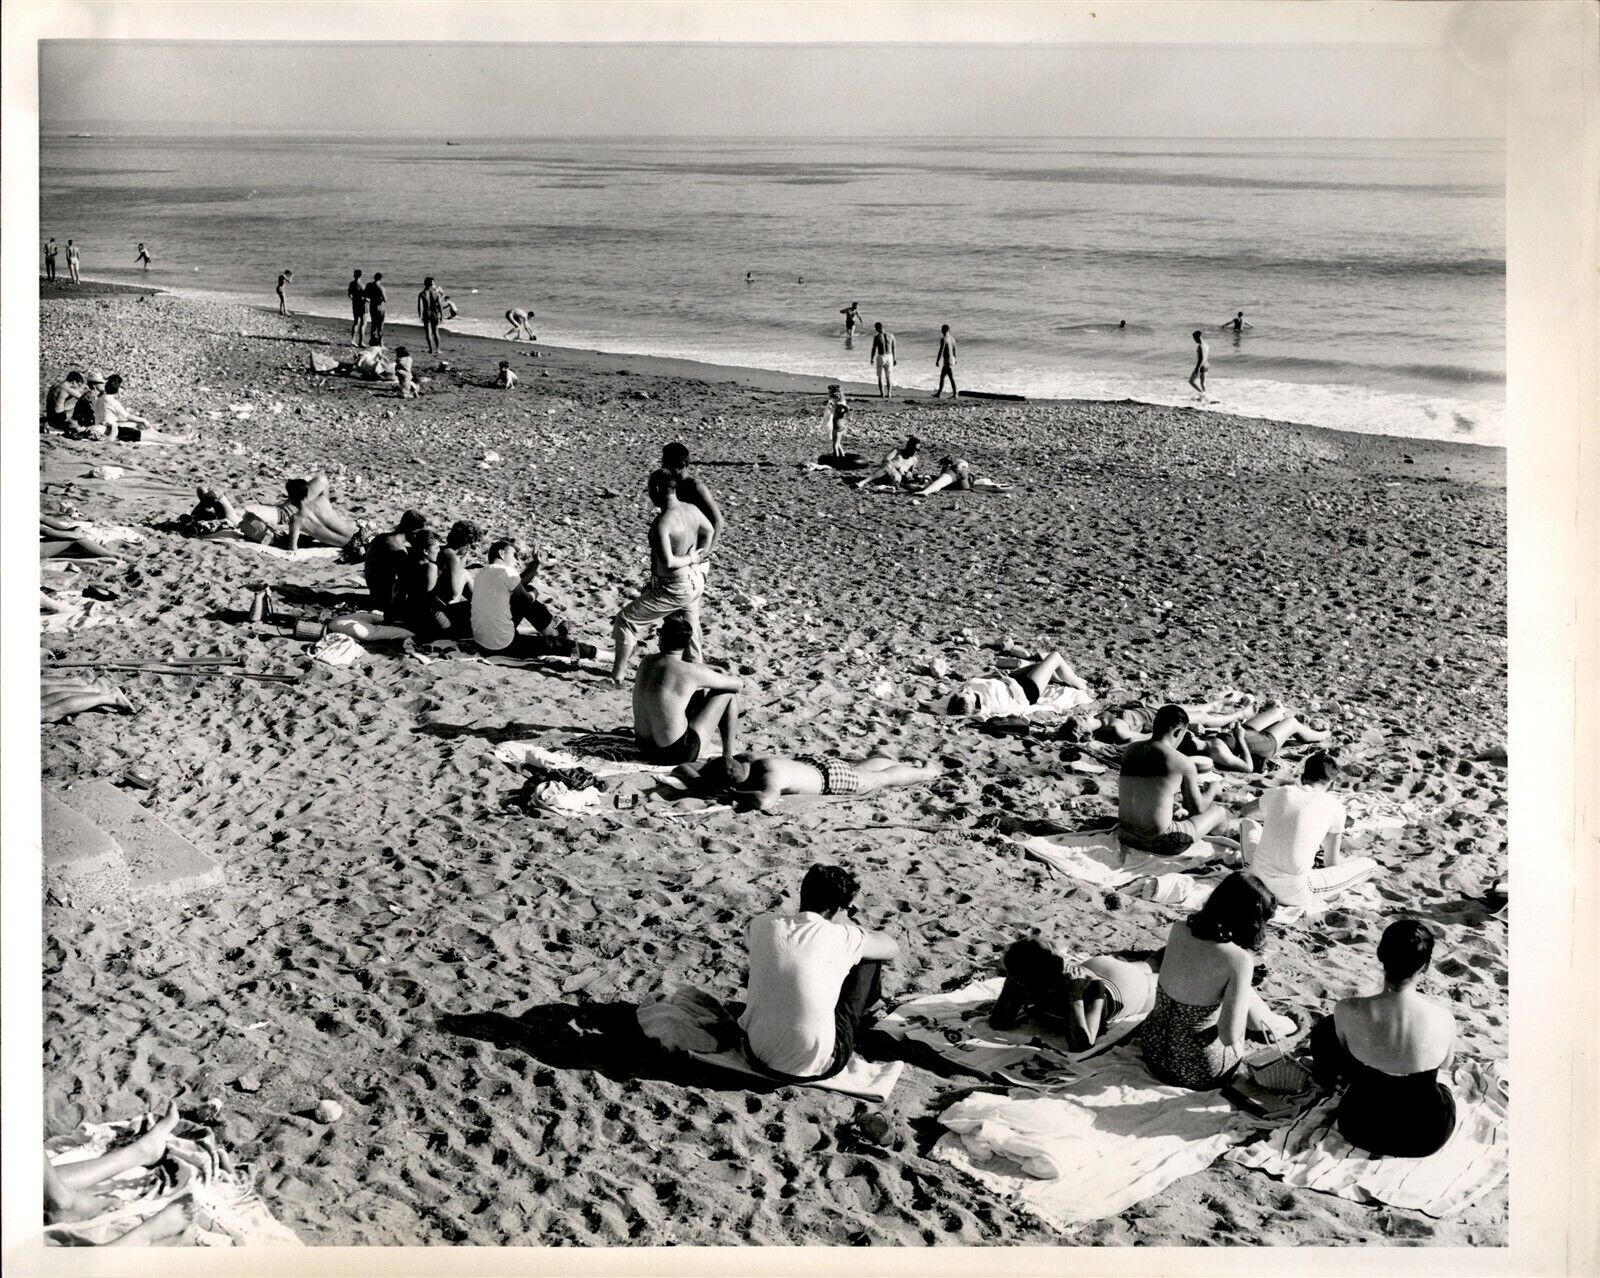 LG902 1961 Orig Photo PISMO BEACH CALIFORNIA Relaxing in Sand Vacation Tourism